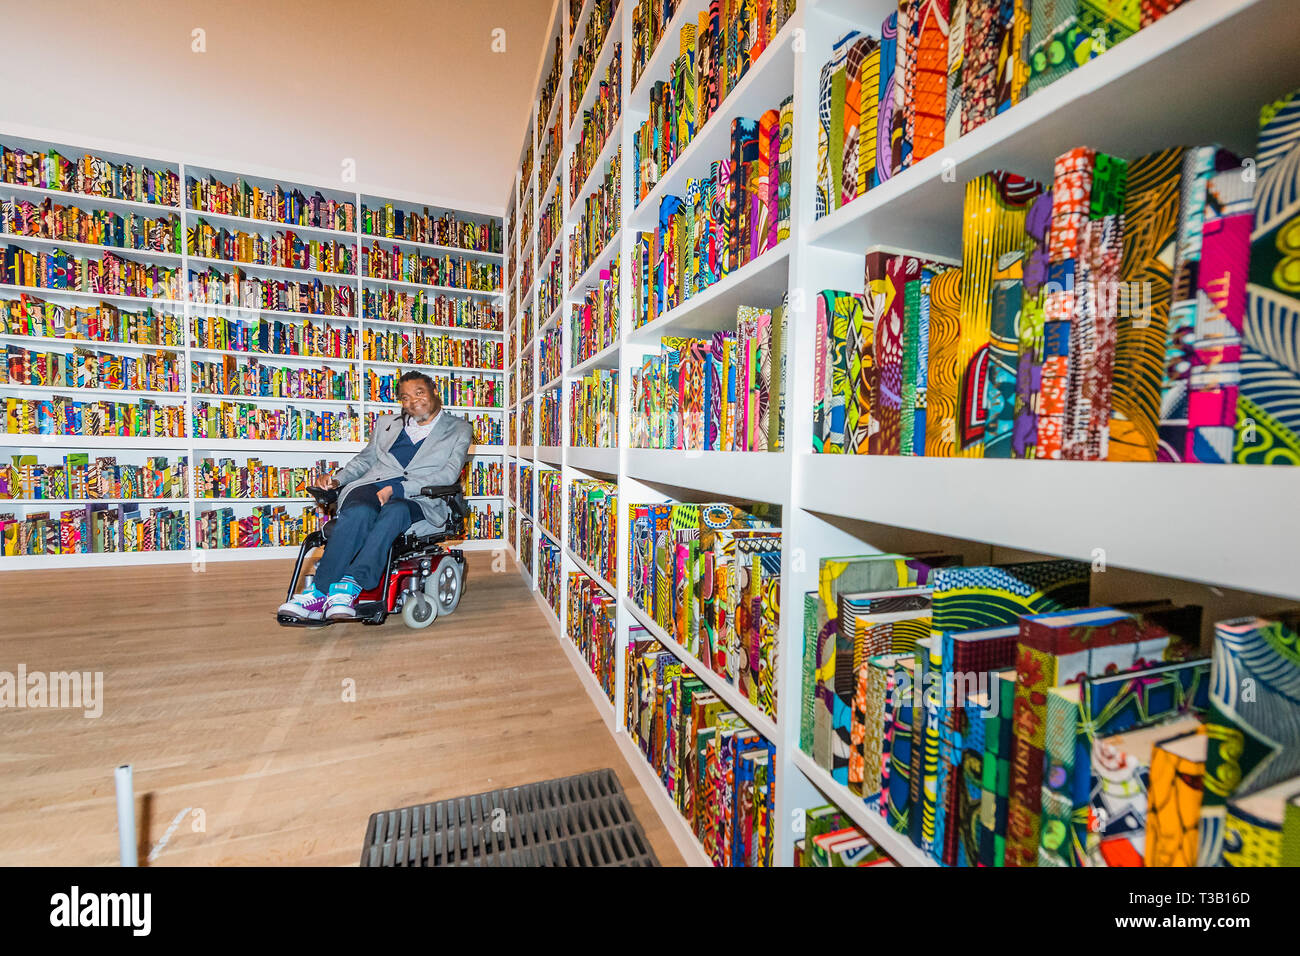 London, UK. 08th Apr, 2019. The British Library an installation by Yinka Shonibare CBE (pictured with his work), at Tate Modern, having just been acquired by them. Highlighting the impact of immigration on British culture, it is a site-specific installation with a digital platform for visitors to join in the discussion.It contains 6,328 books bound in ‘Dutch wax print. The installation also contains an area for audiences to access information about the project on tablets. Credit: Guy Bell/Alamy Live News Stock Photo